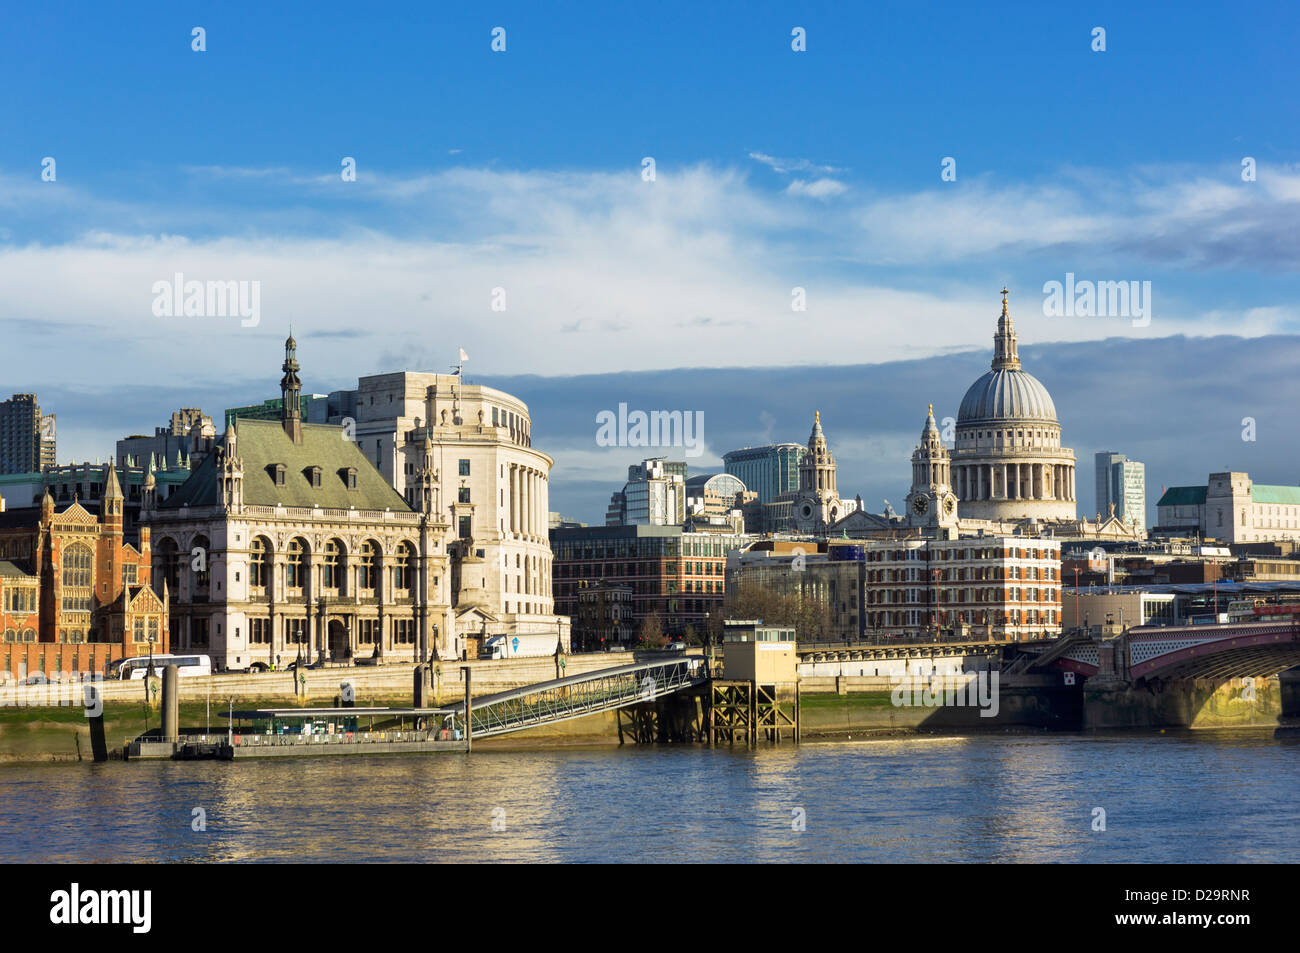 St Pauls cathedral, river Thames and city buildings, London, UK Stock Photo